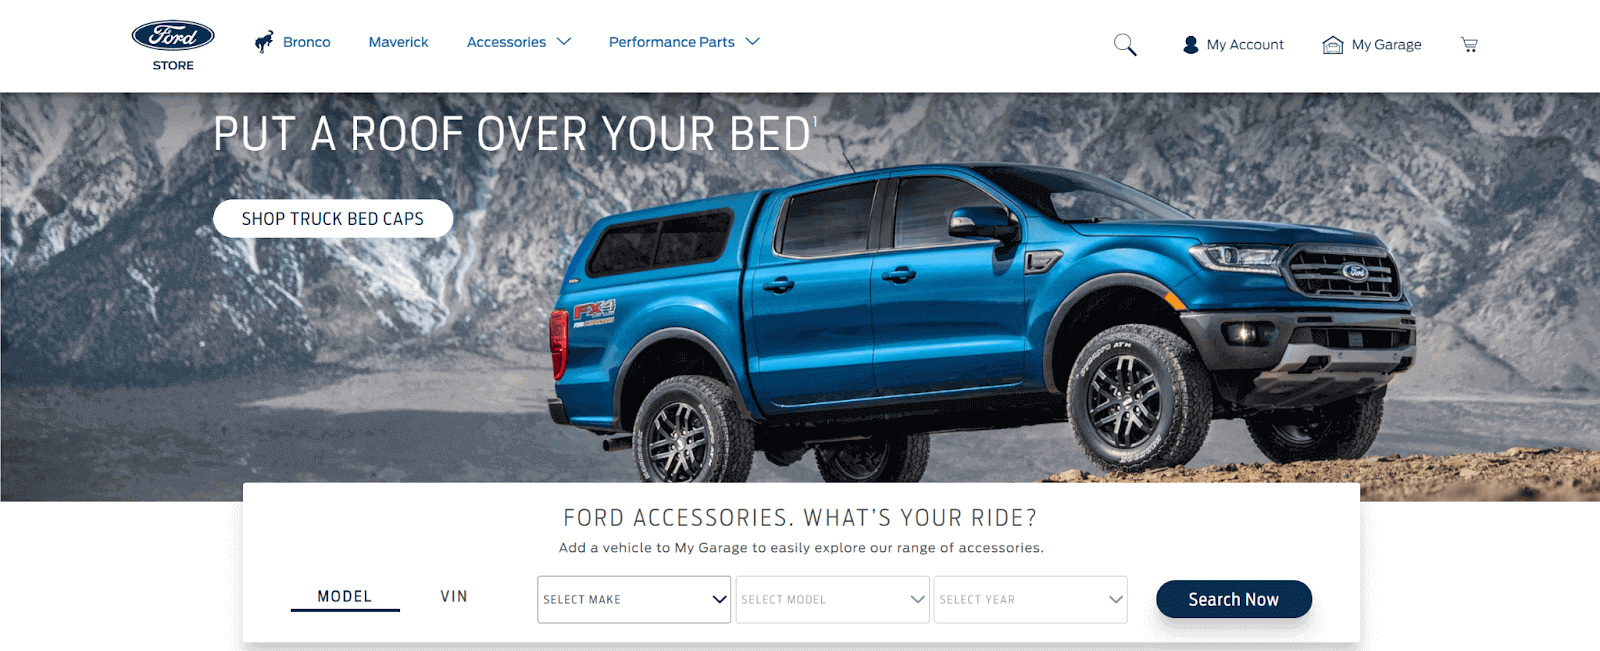 Ford - The automobile manufacturer 